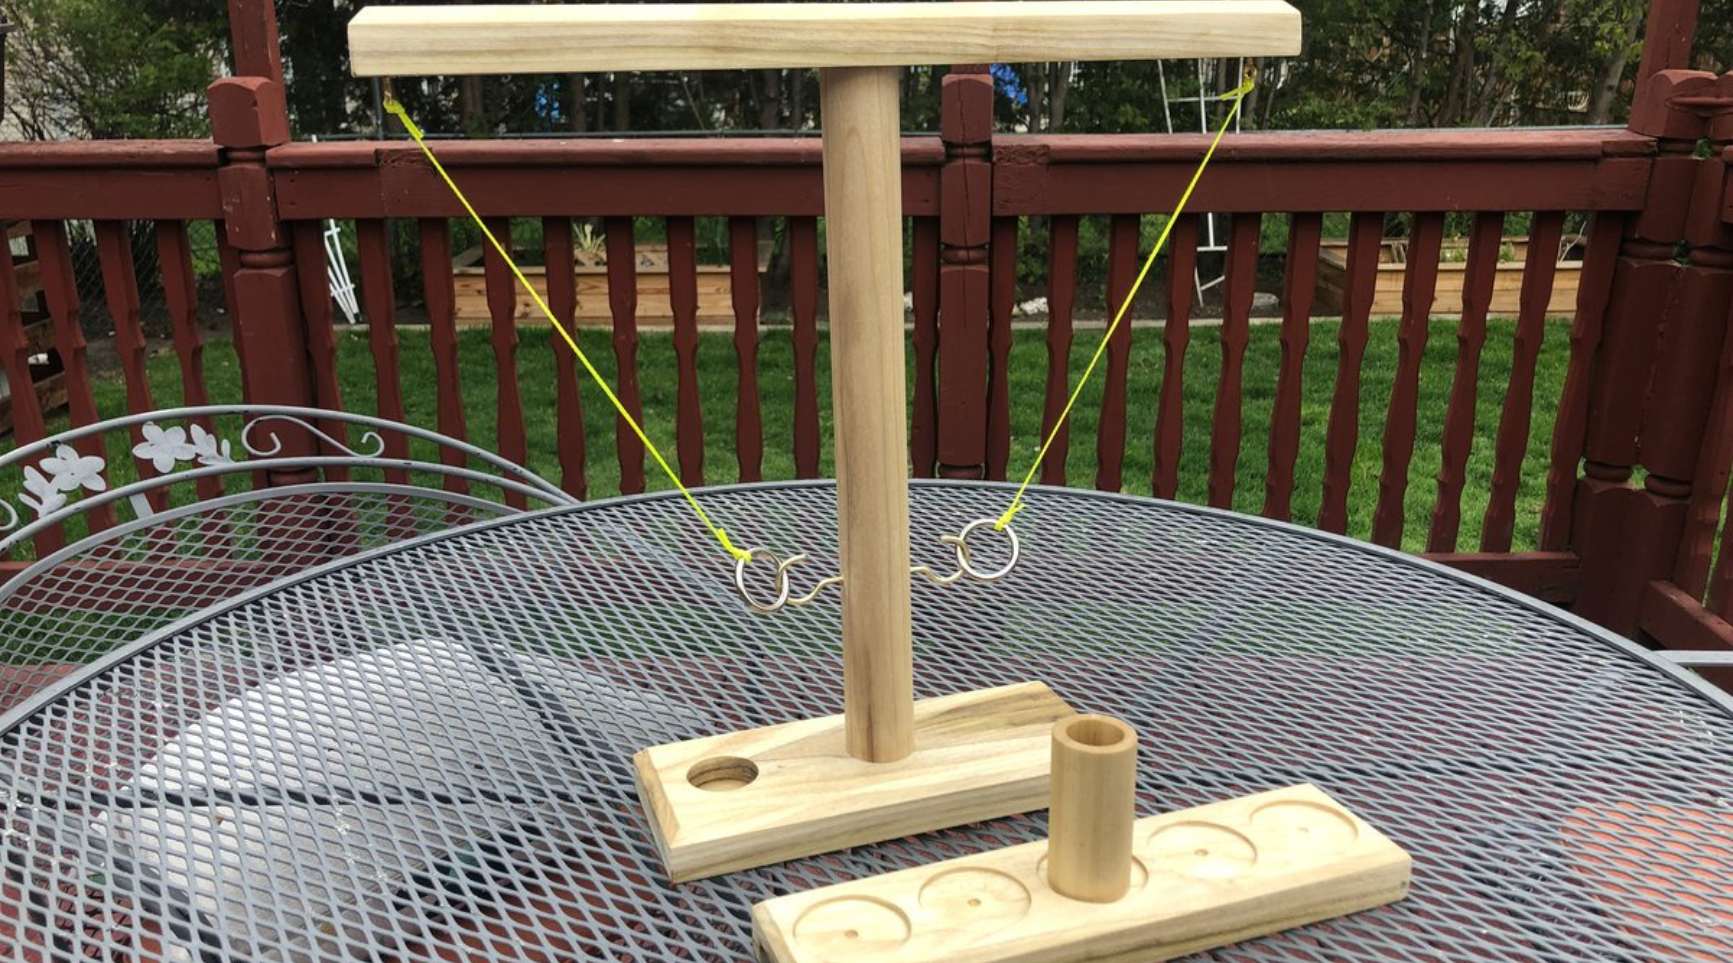 How To Make A Tiki Ring Toss